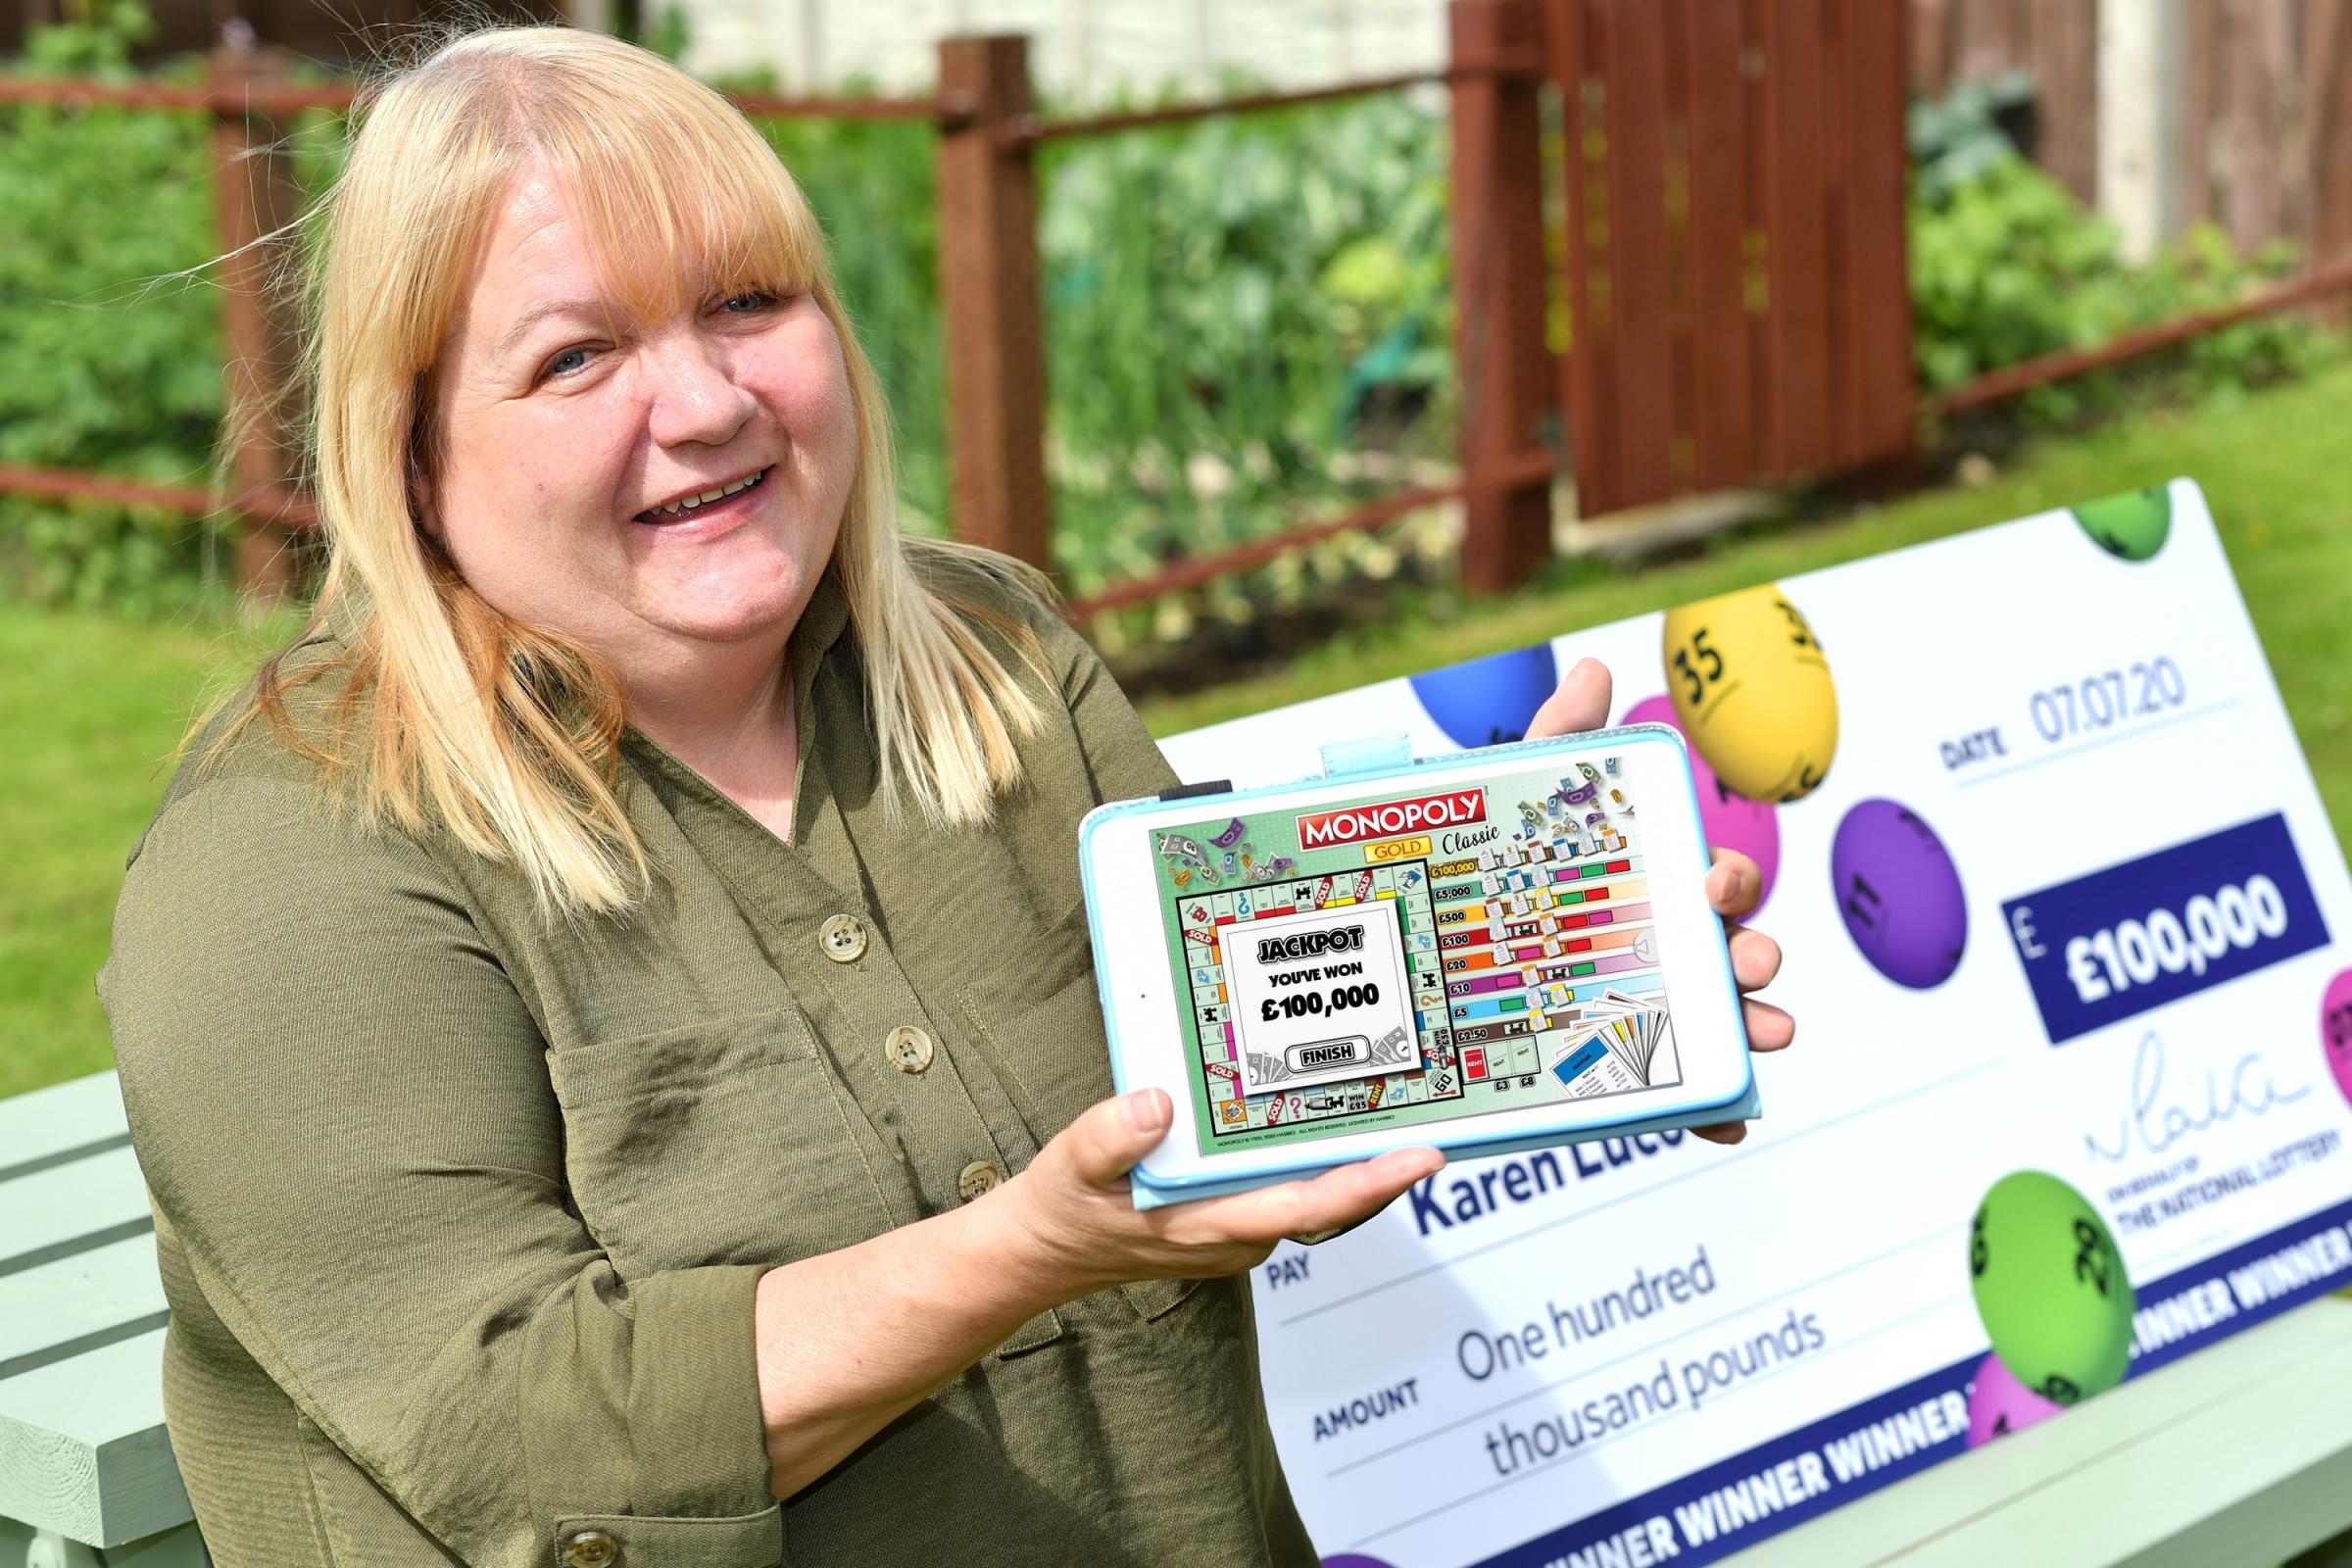 Karen Lucock, from Carlisle – won £100,000 on a National Lottery Instant Win Game in 2020. Picture: National Lottery